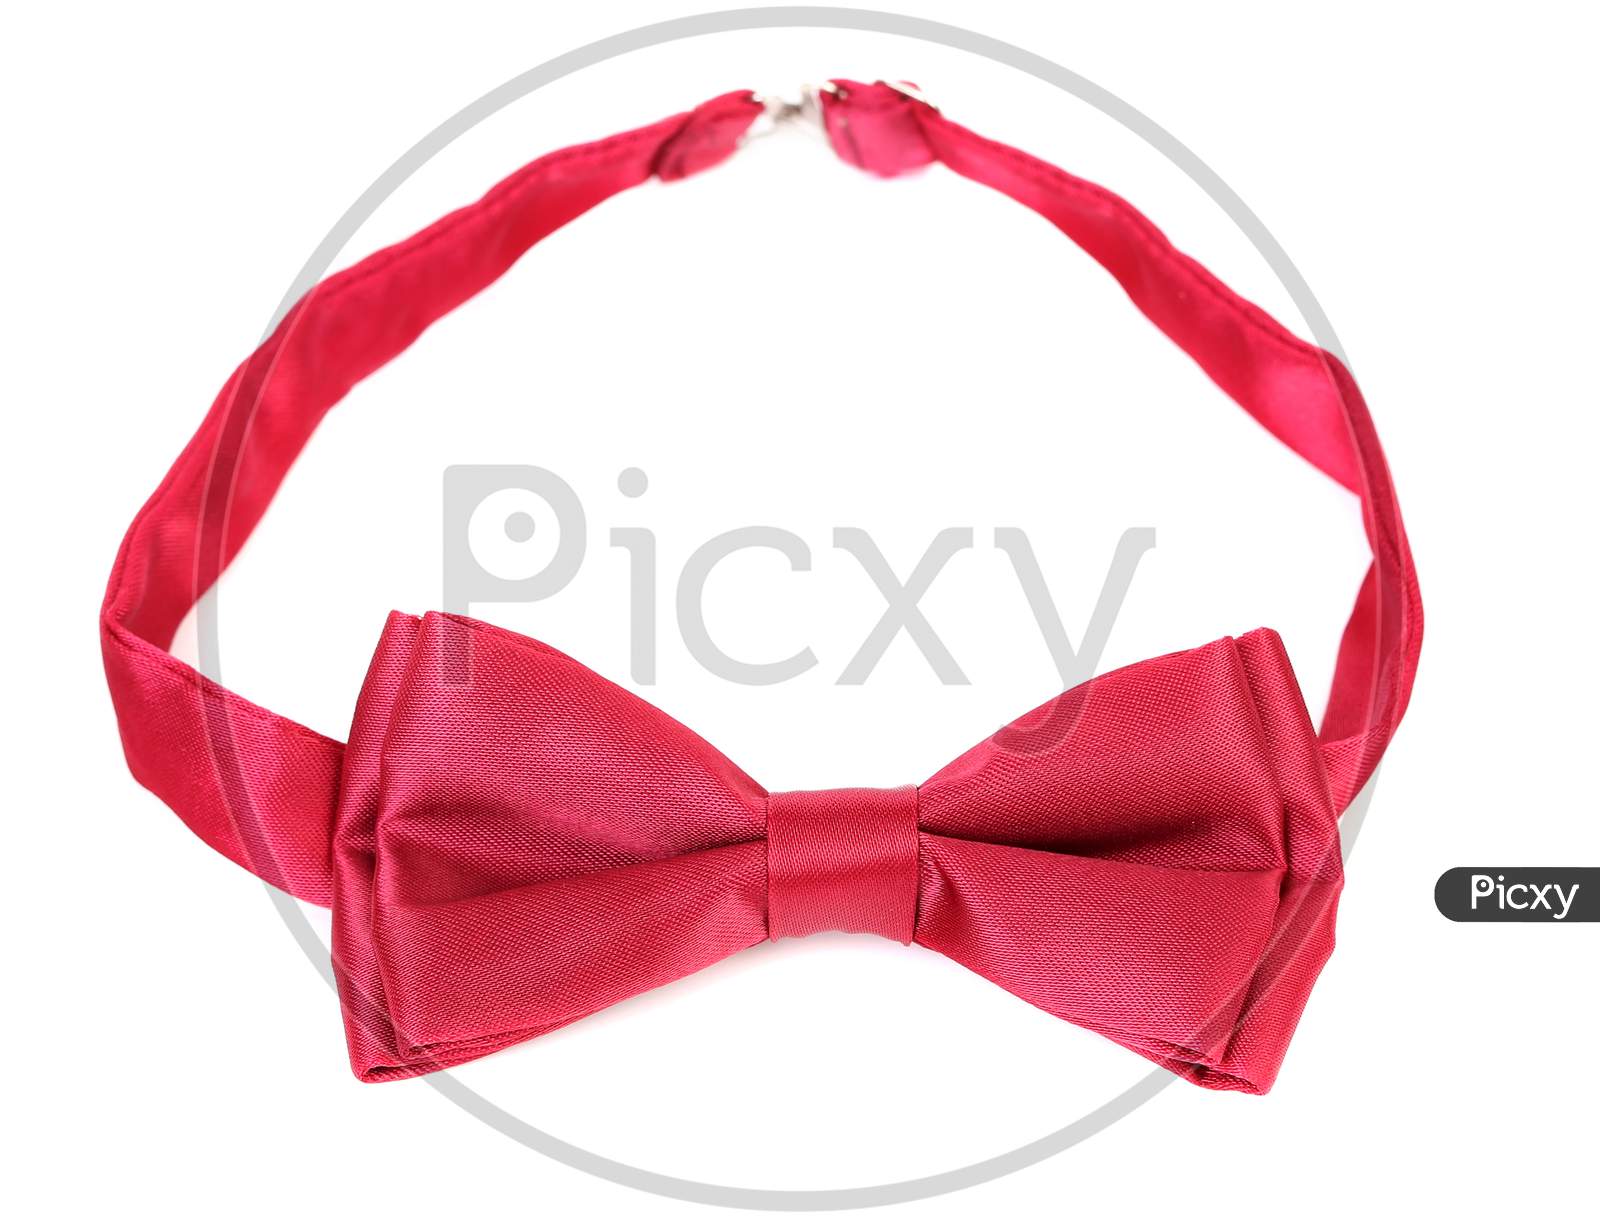 Red Bow Tie. Isolated On A White Background.